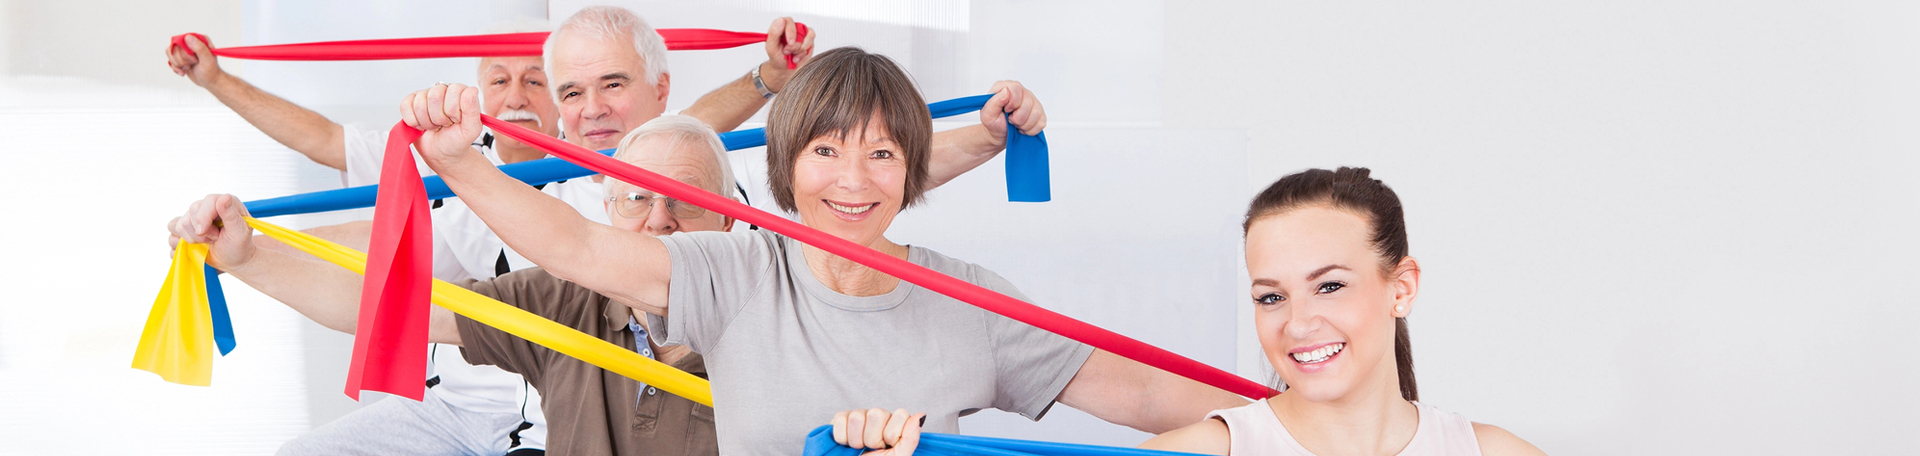 Richmond chiropractic care and exercise of all sorts help reduce chronic pain and distress